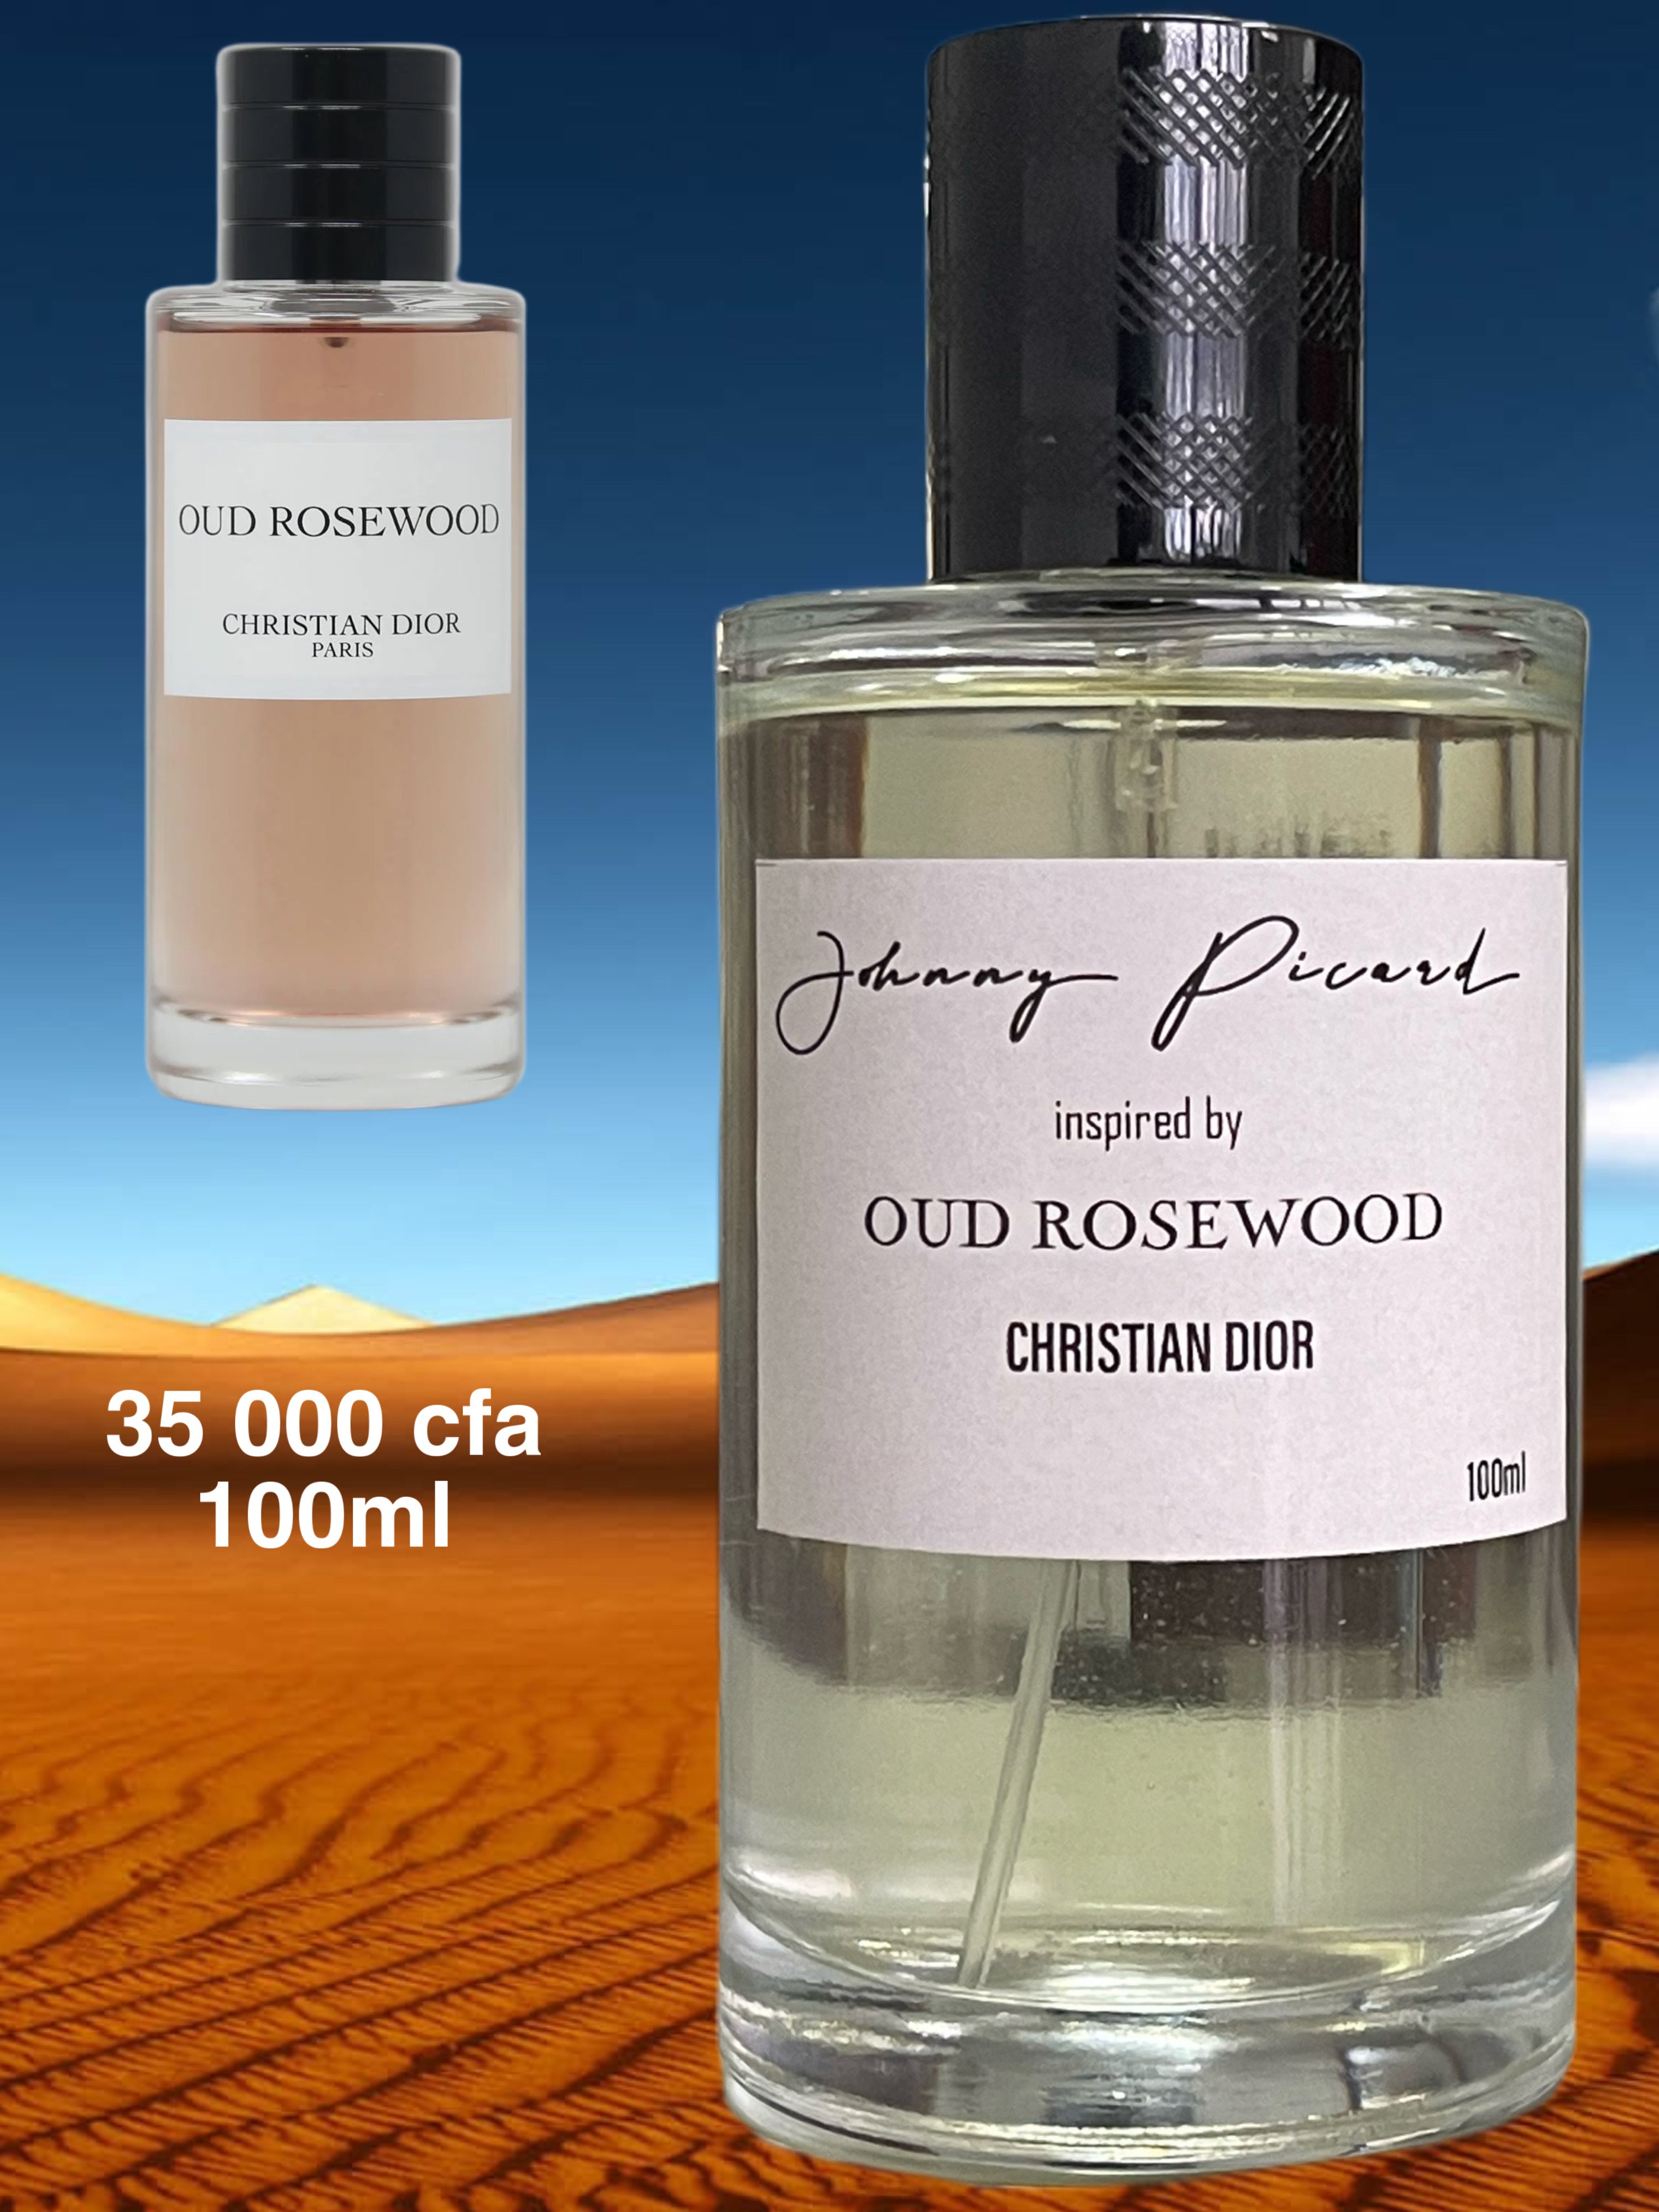 johnny picard inspired by oud rosewood  CHRISTIAN DIOR